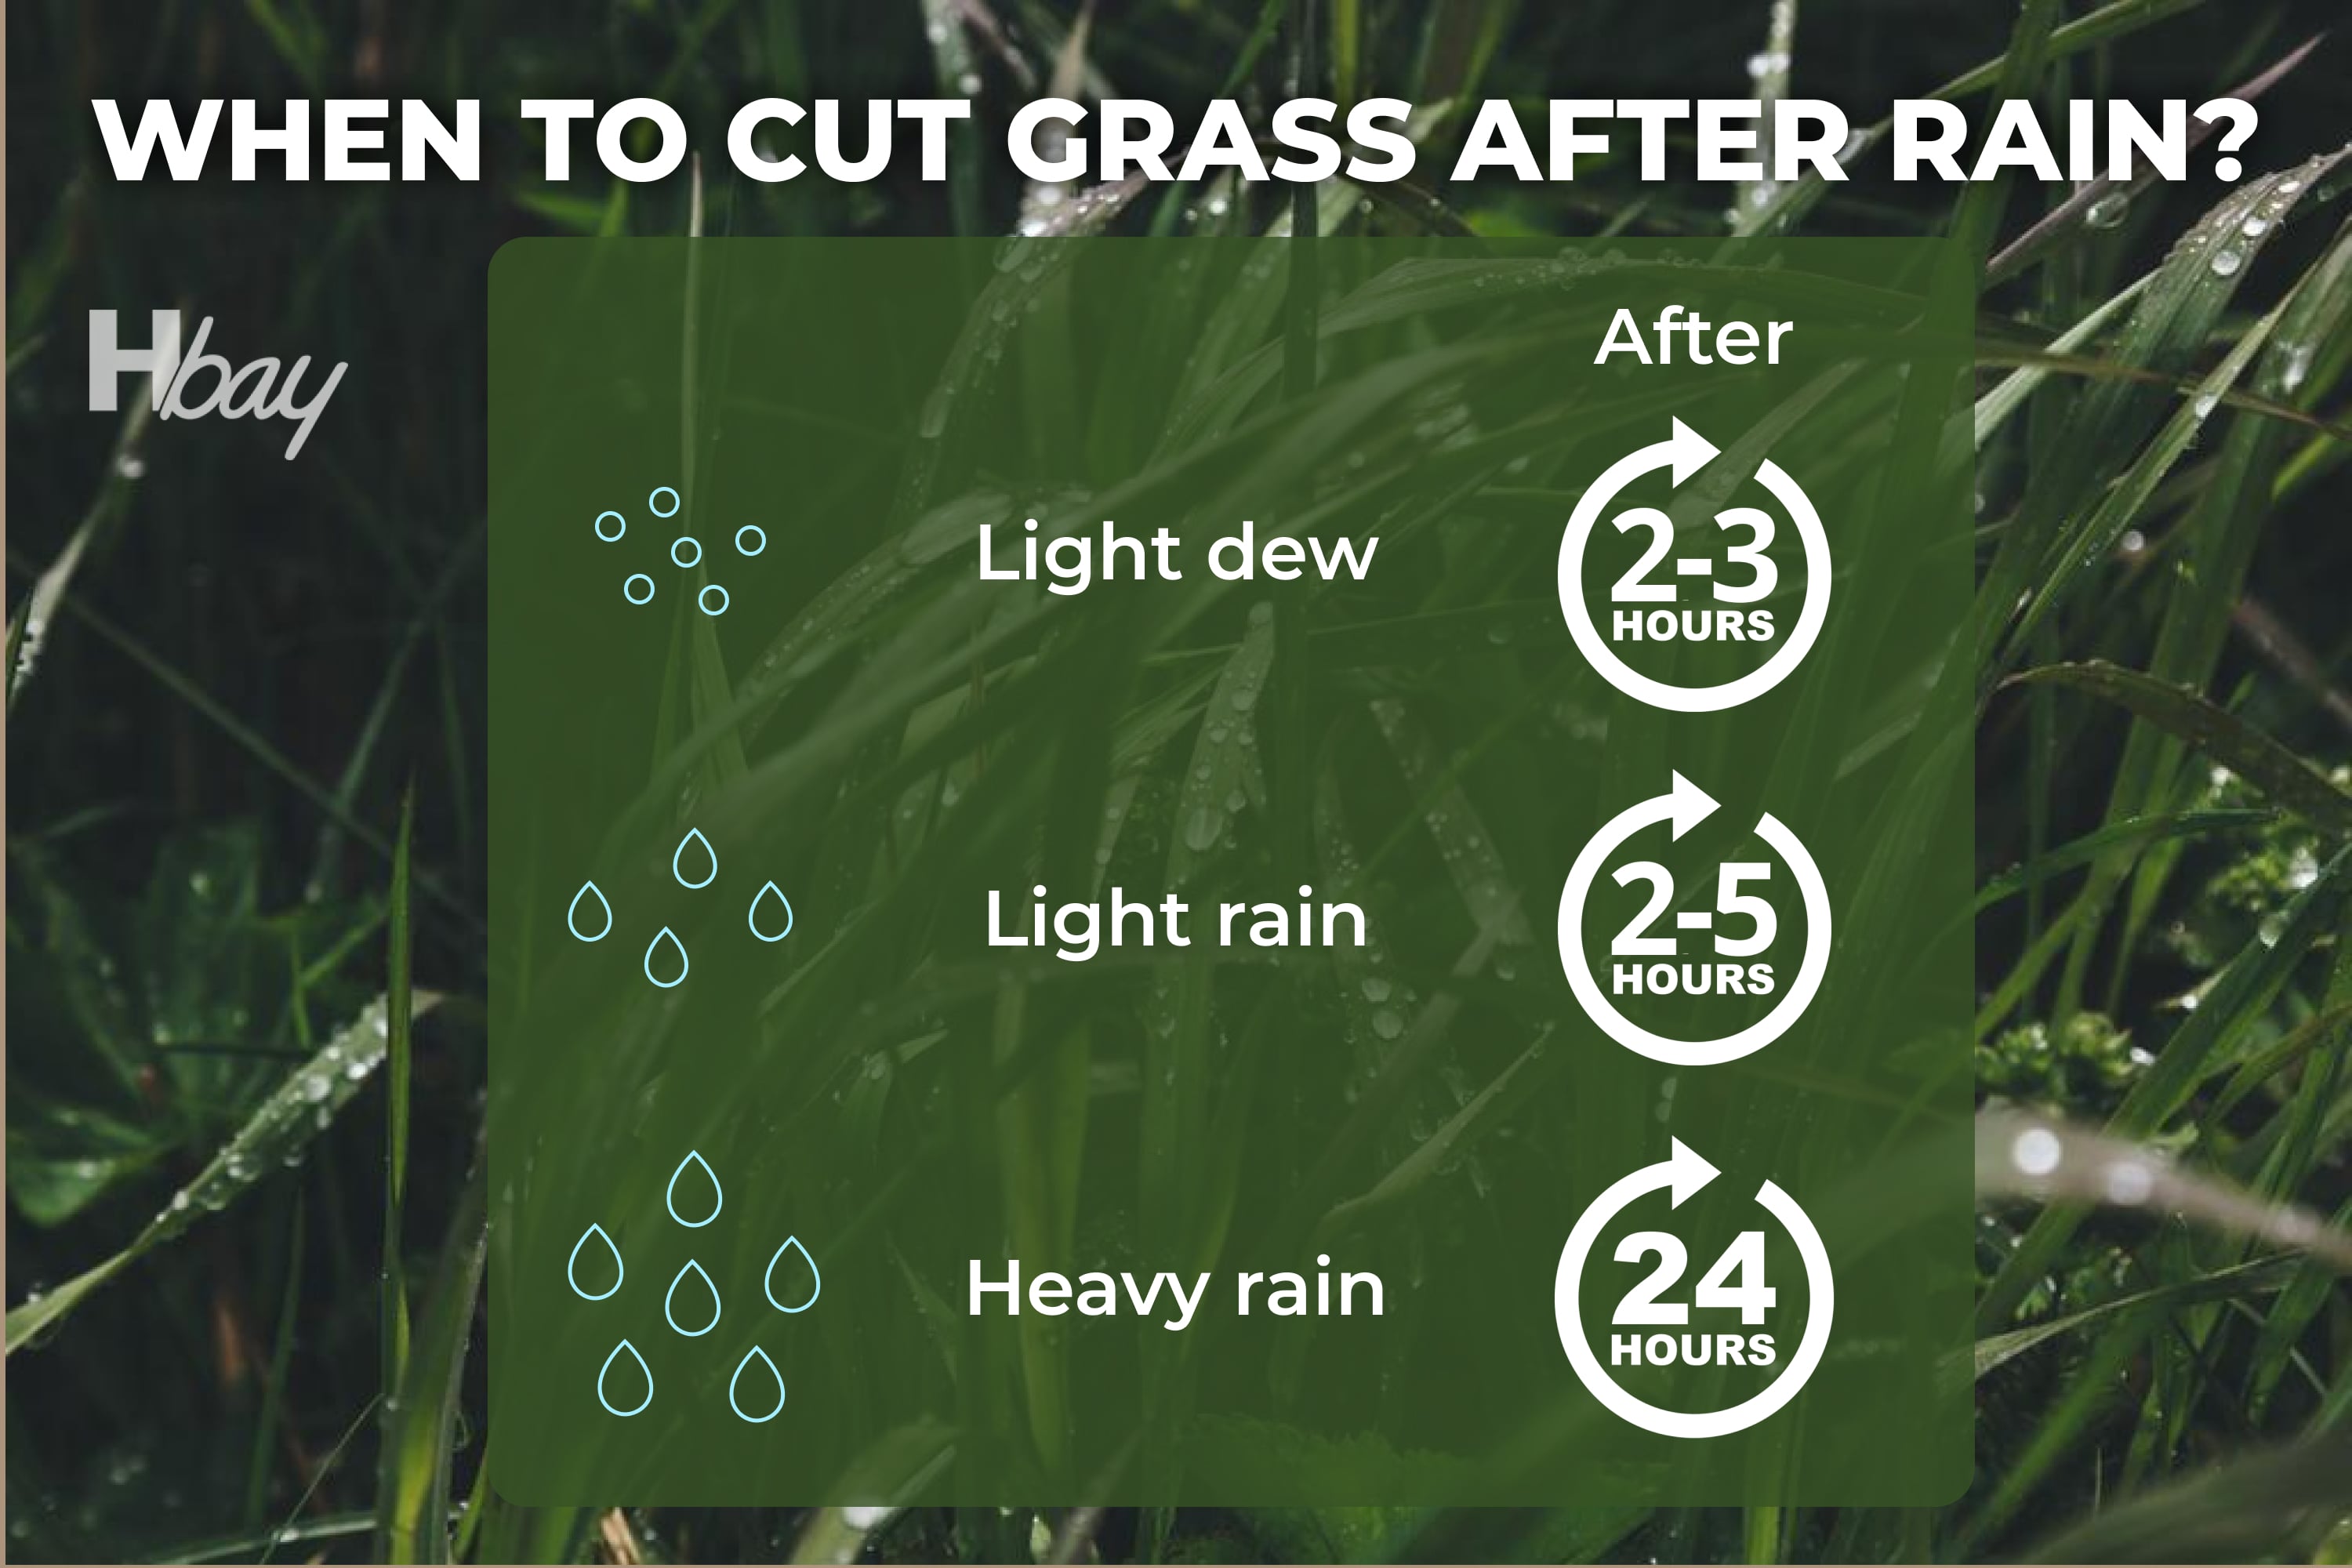 How Long Does Grass Take to Dry After Rain